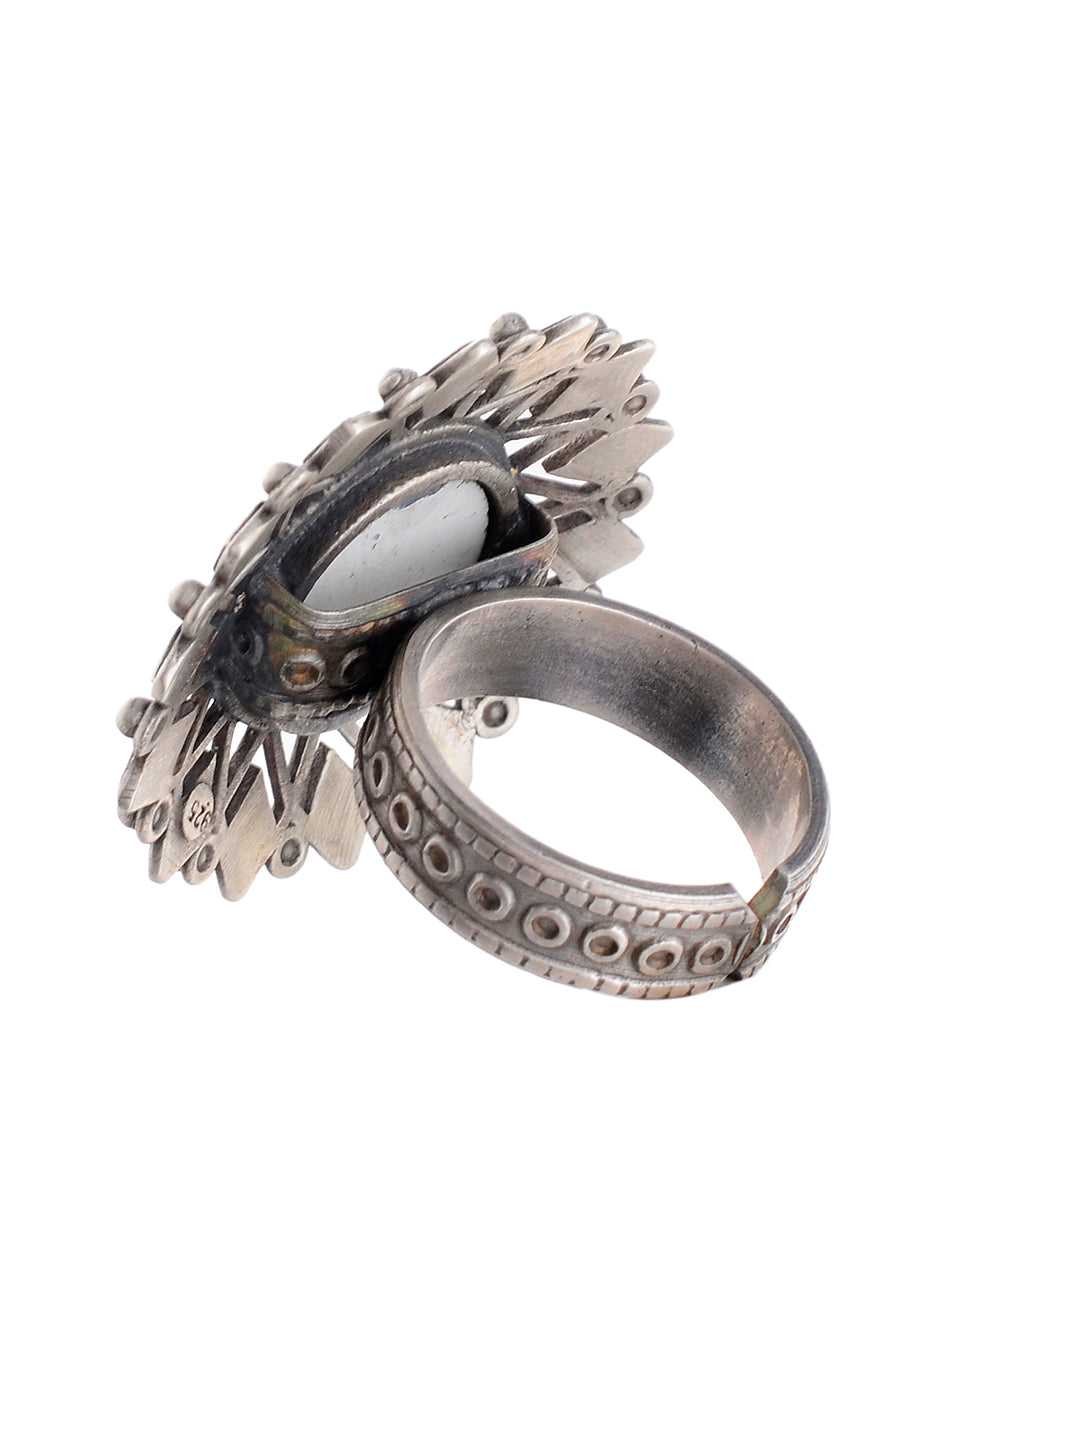 Antique Mirror Sterling Silver Ring